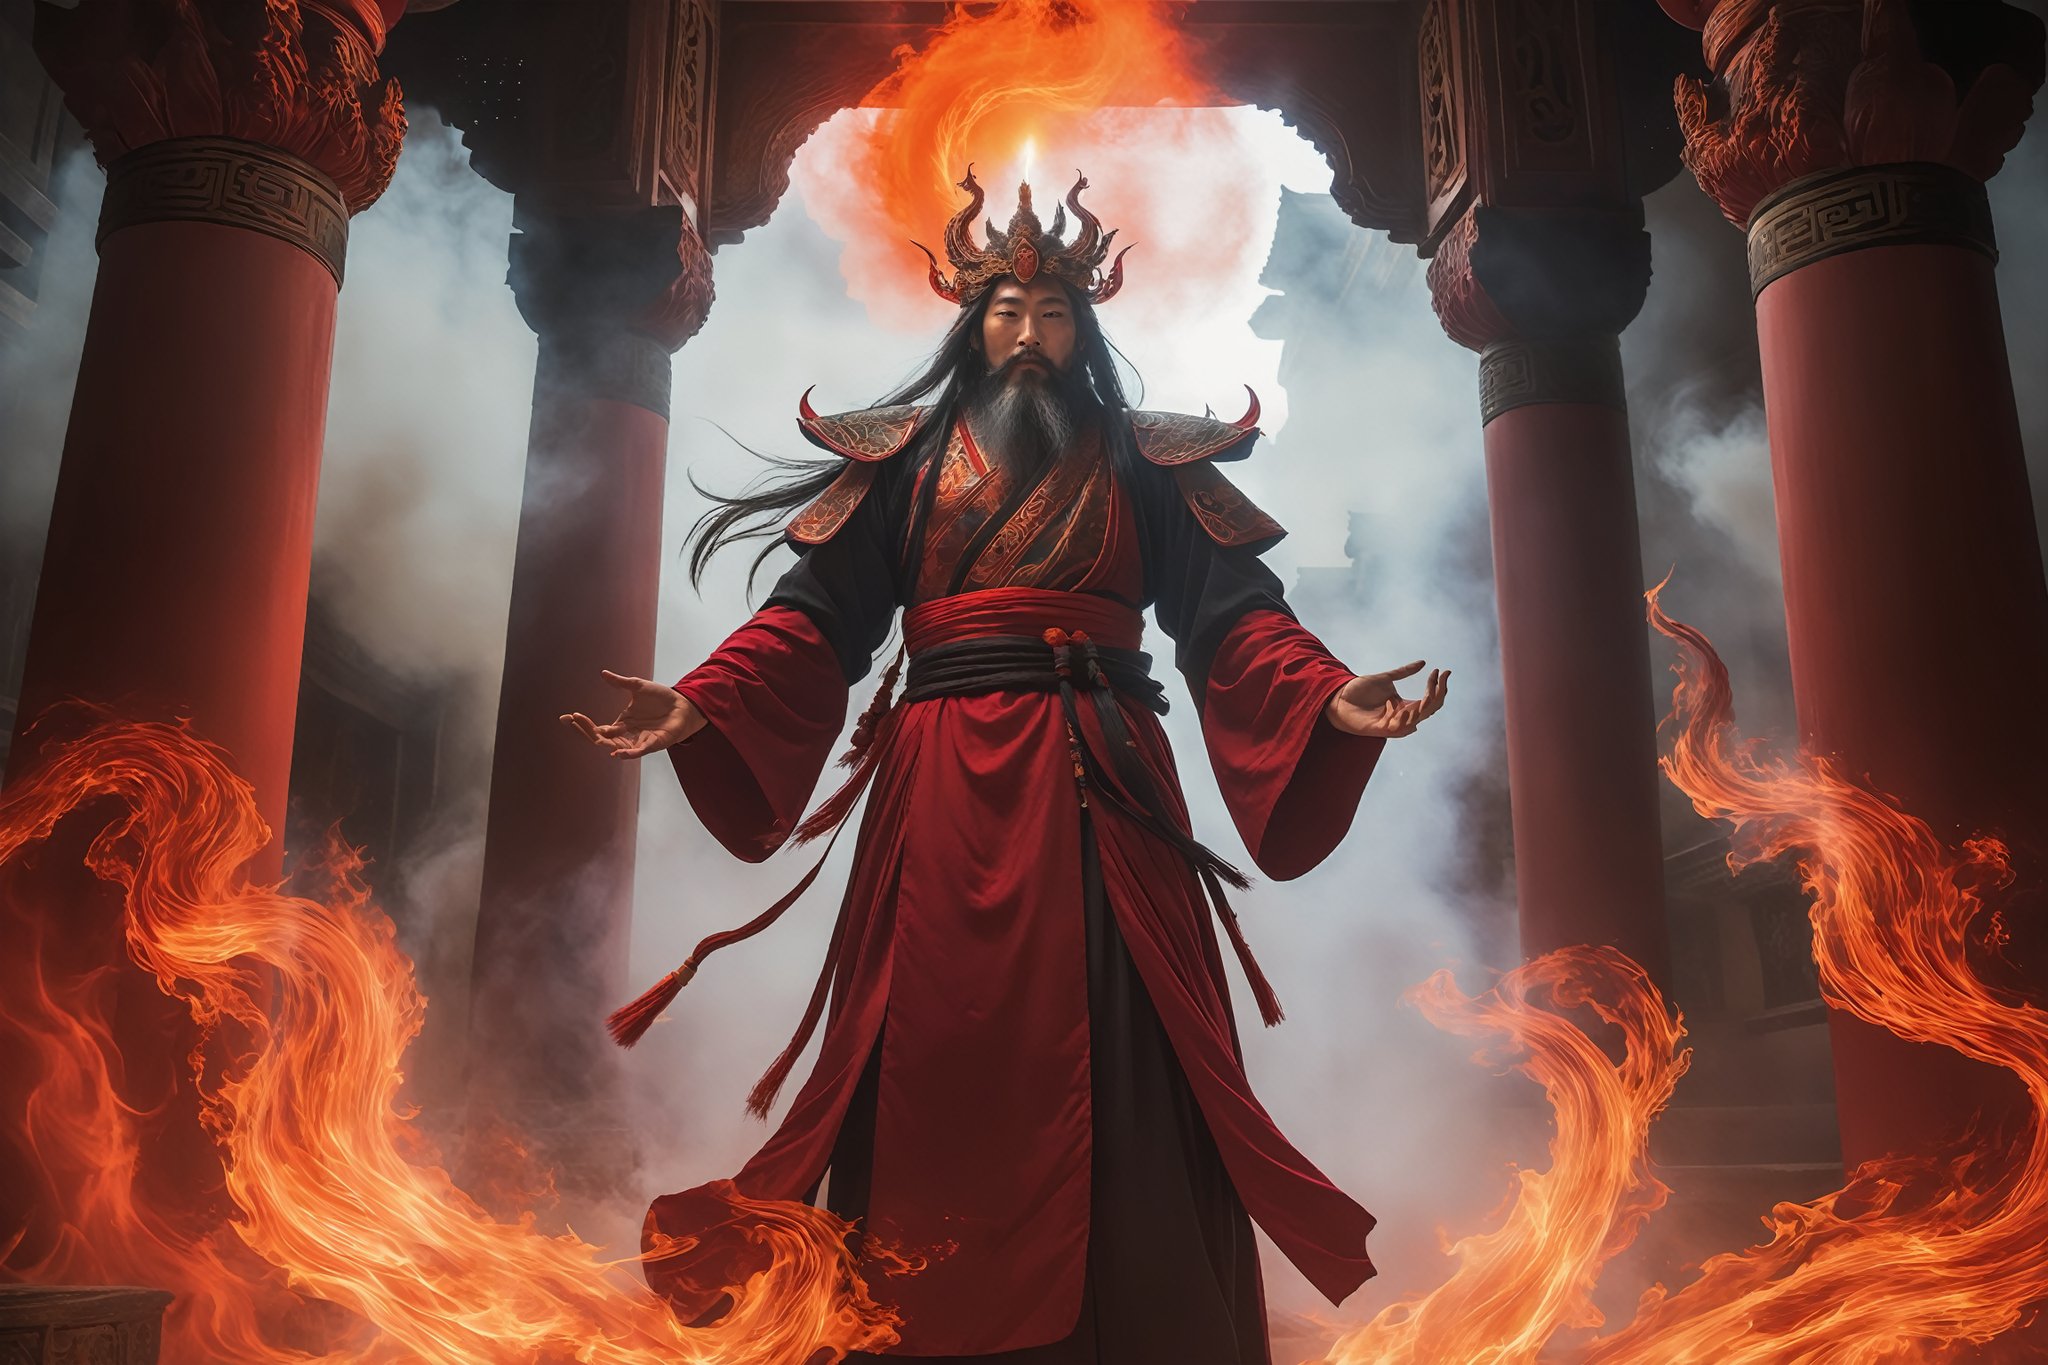 A mystical scene unfolds: a god stands amidst a dimly lit, ancient temple, surrounded by wispy curtains of smoke. The god's hands glow with fiery energy as they hold aloft a crimson-hued staff, its tip crackling with red flame magic. The air is thick with the scent of burning incense and smoldering dragon's breath, as if the very flames themselves are alive.